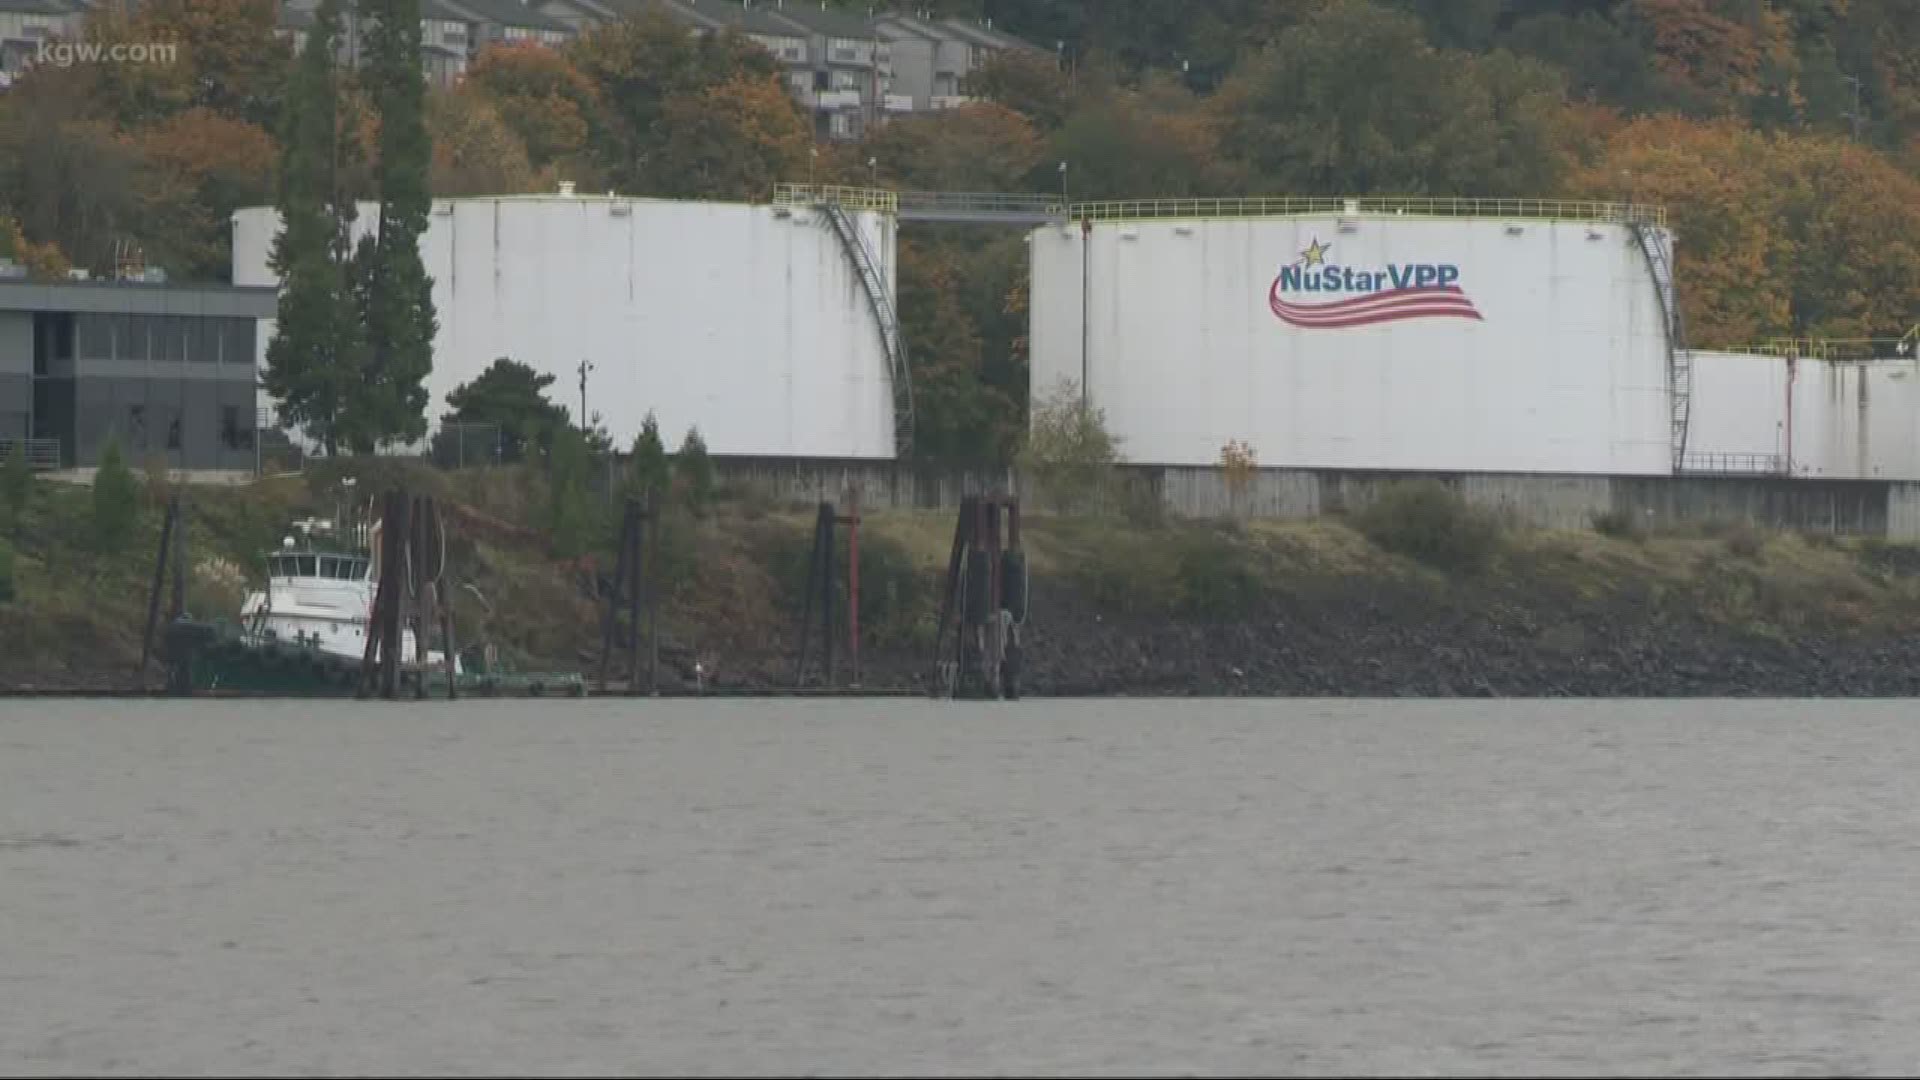 Are Portland fuel tanks at risk? We examine the impacts from earthquakes on area fuel tanks.